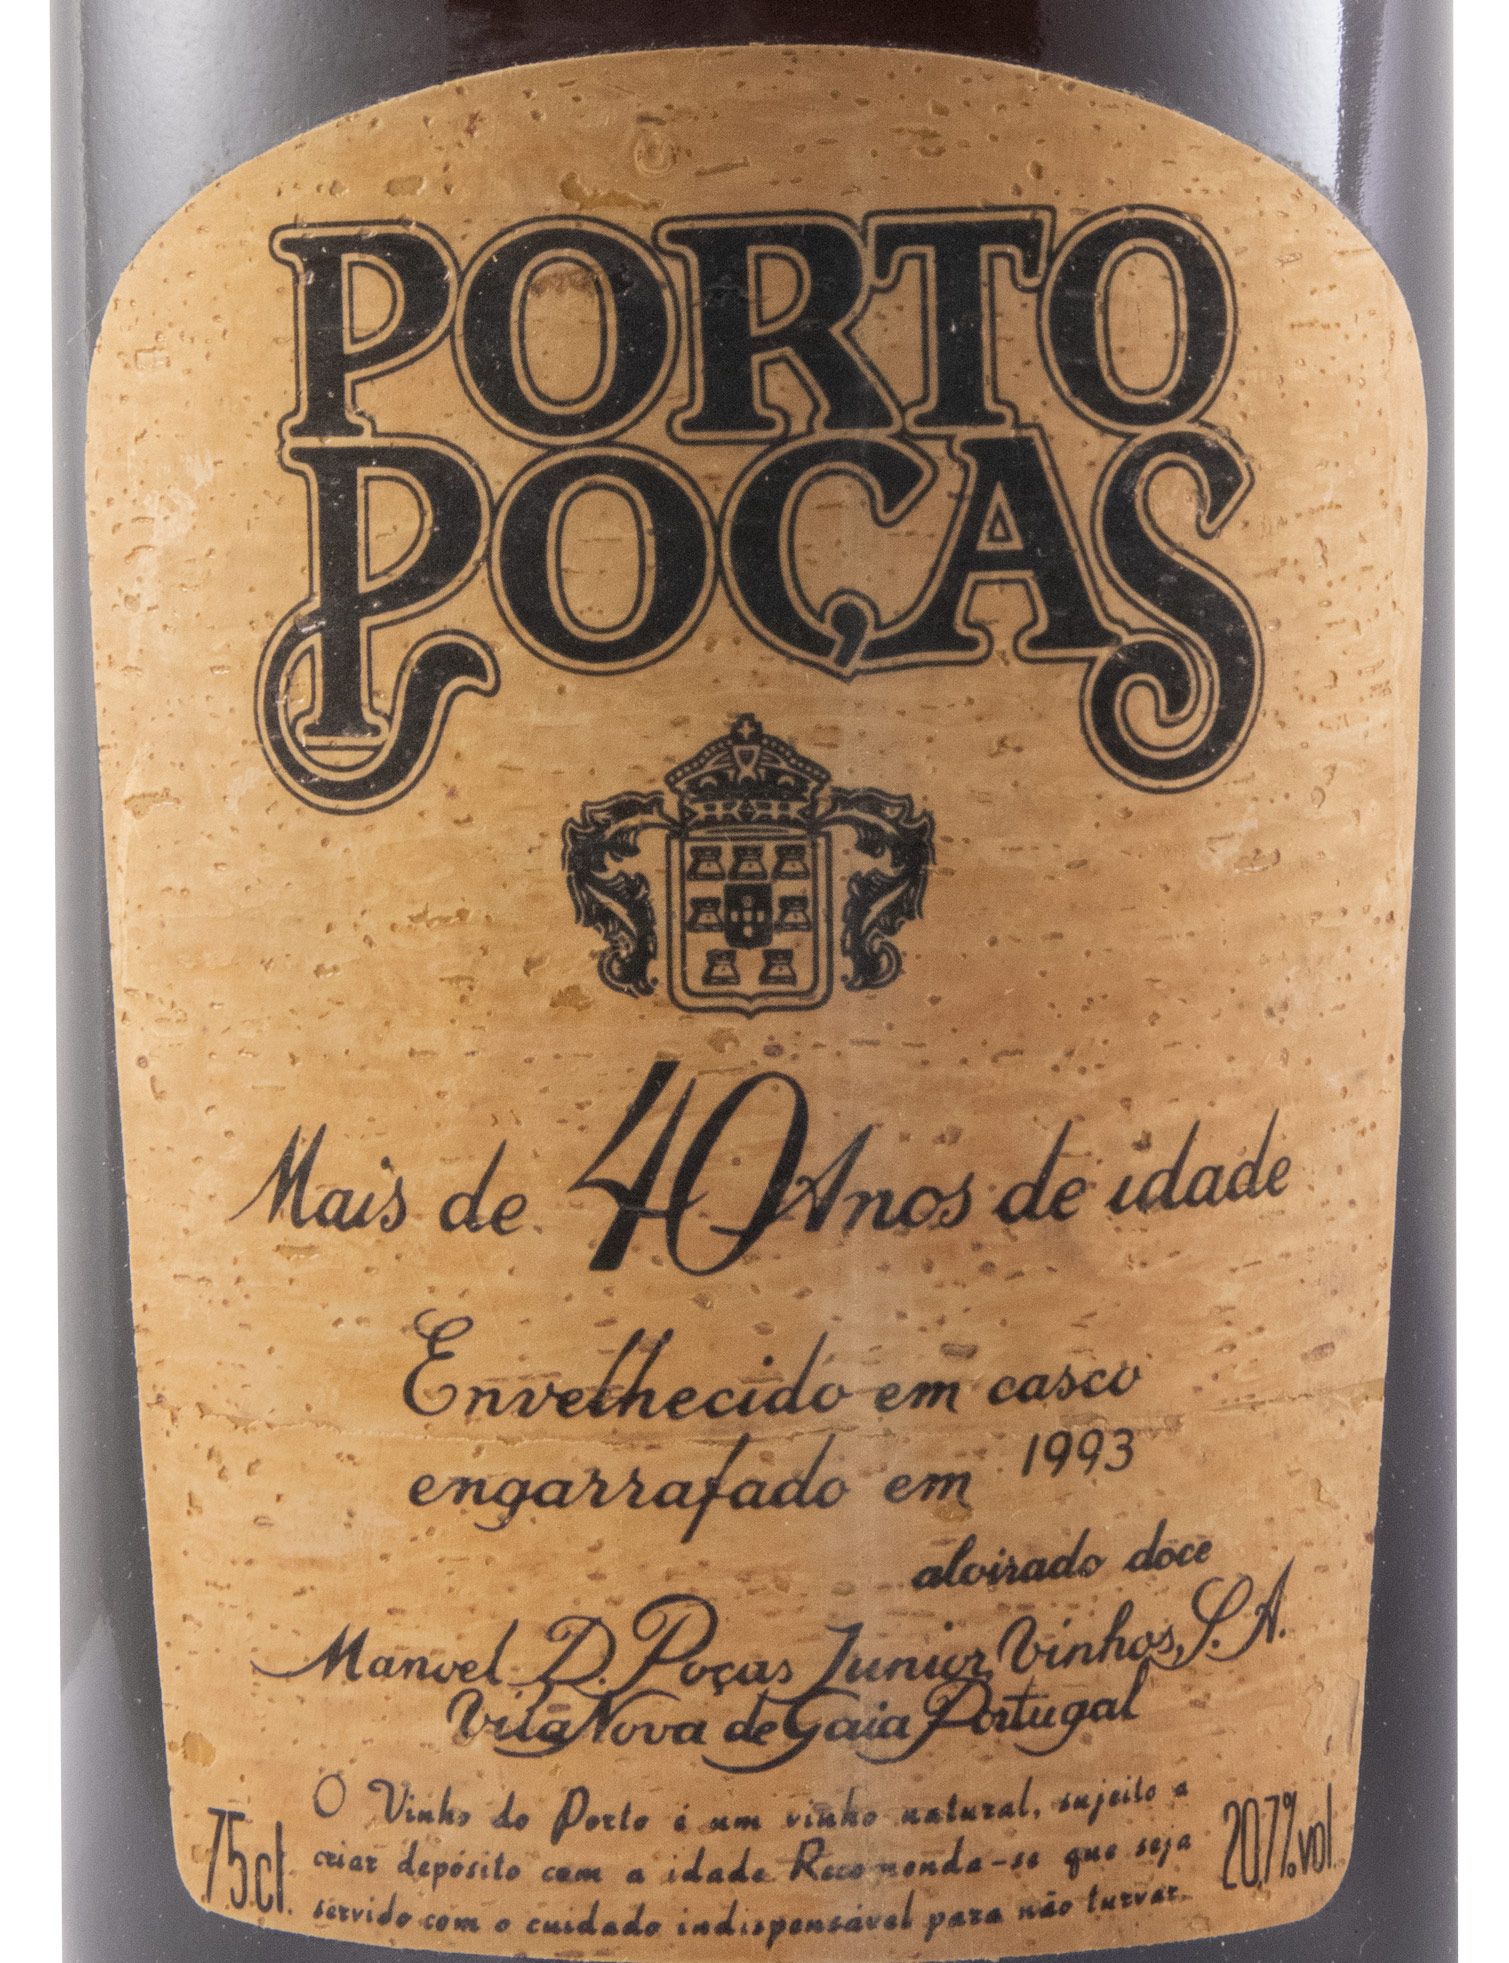 Poças +40 years Port (bottled in 1993)